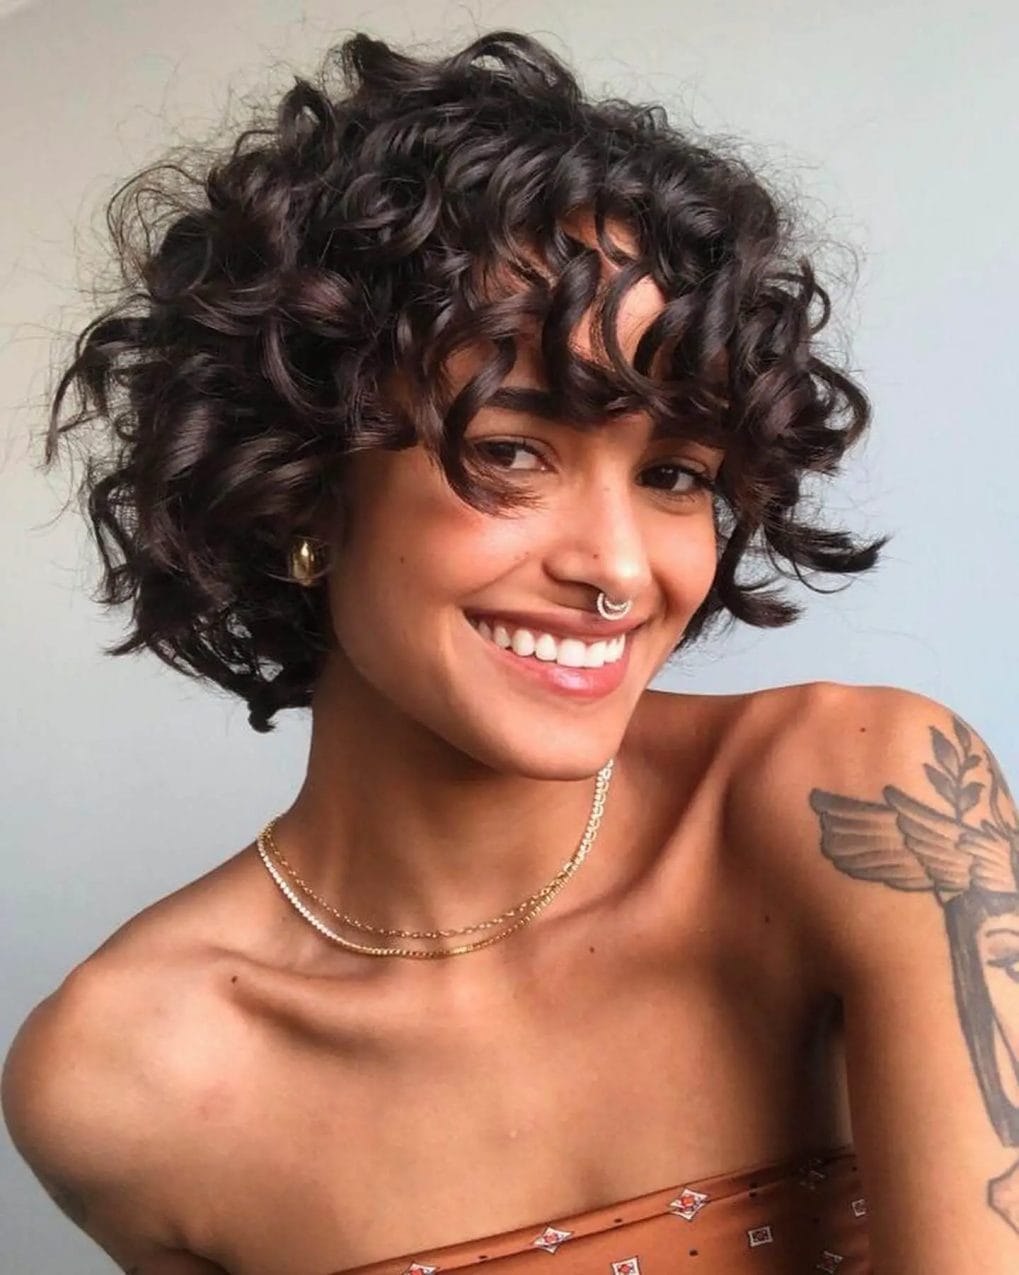 Short hairstyle with voluminous, tight perm curls.